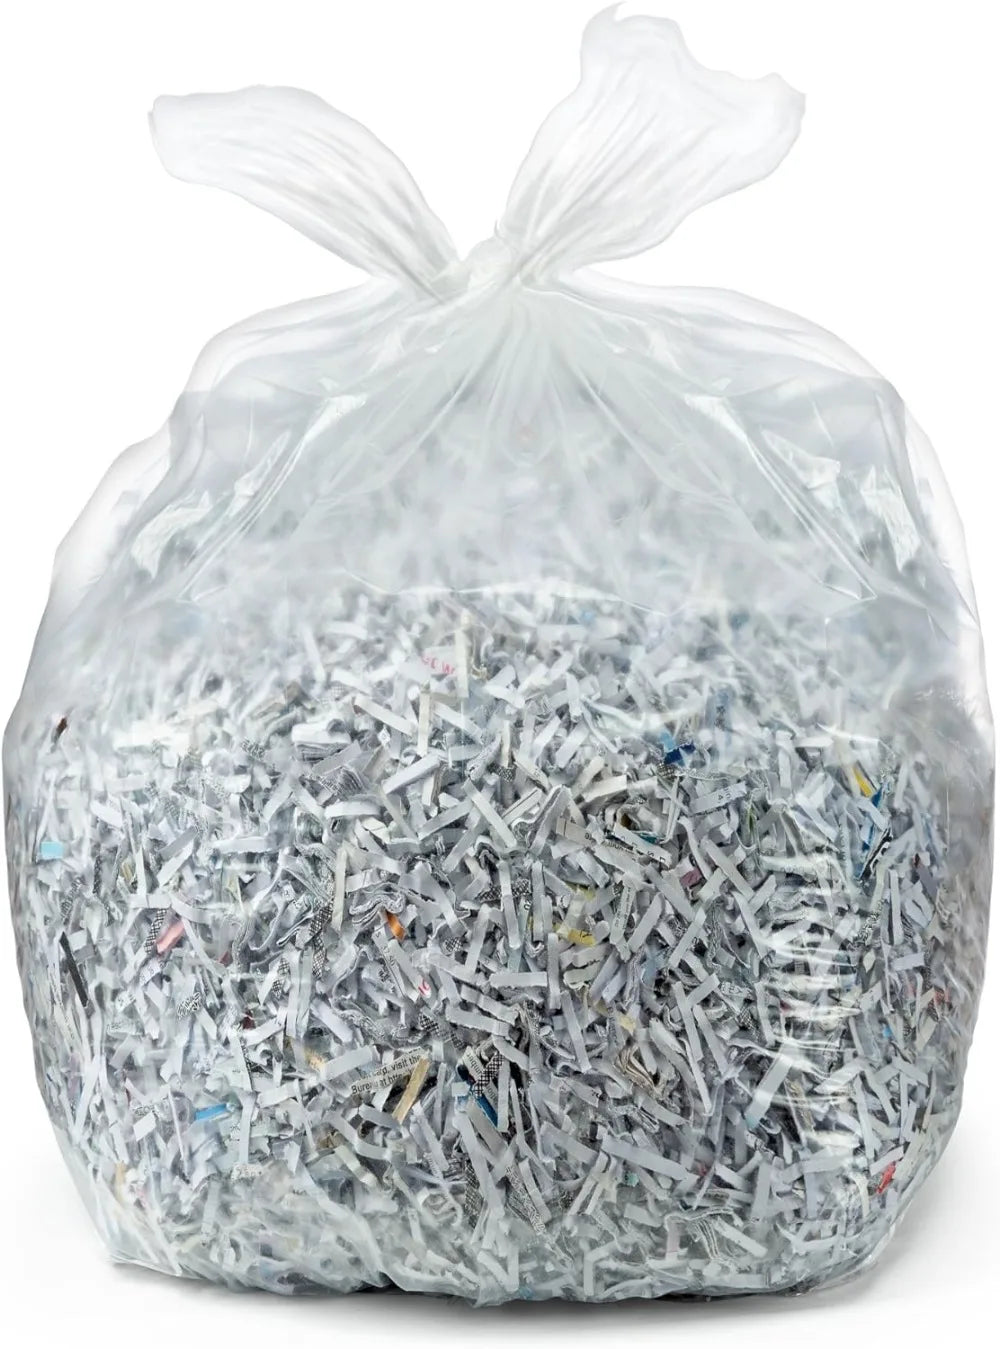 55-60 Gallon Clear Trash Bags, (50 Bags w/Ties) Large Clear Plastic Recycling Garbage Bags